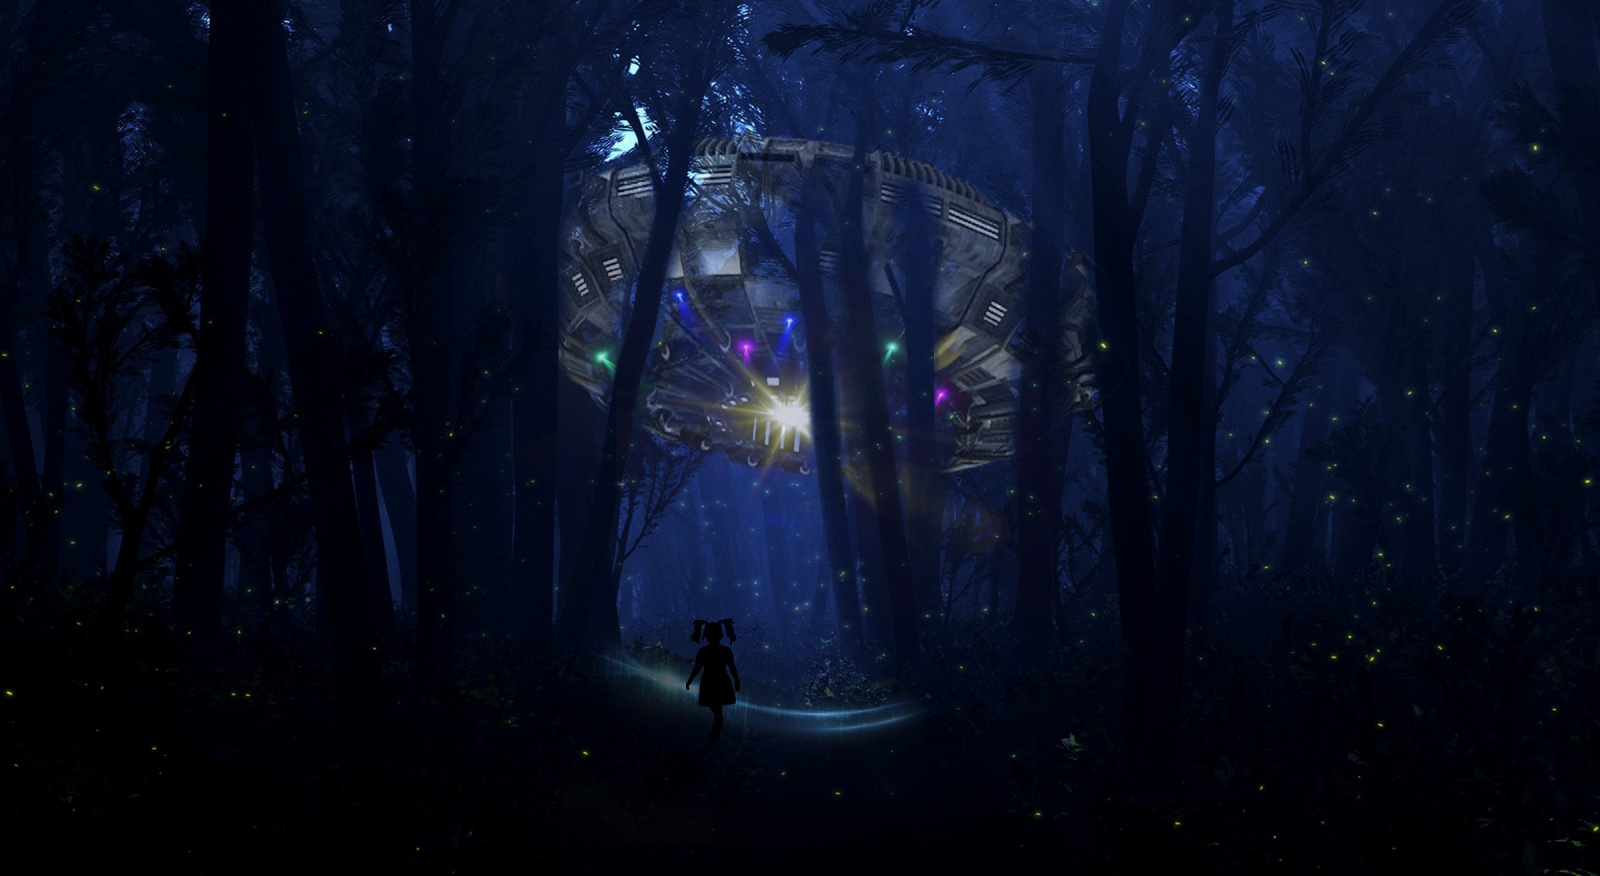 Little Girl in Forest with UFO